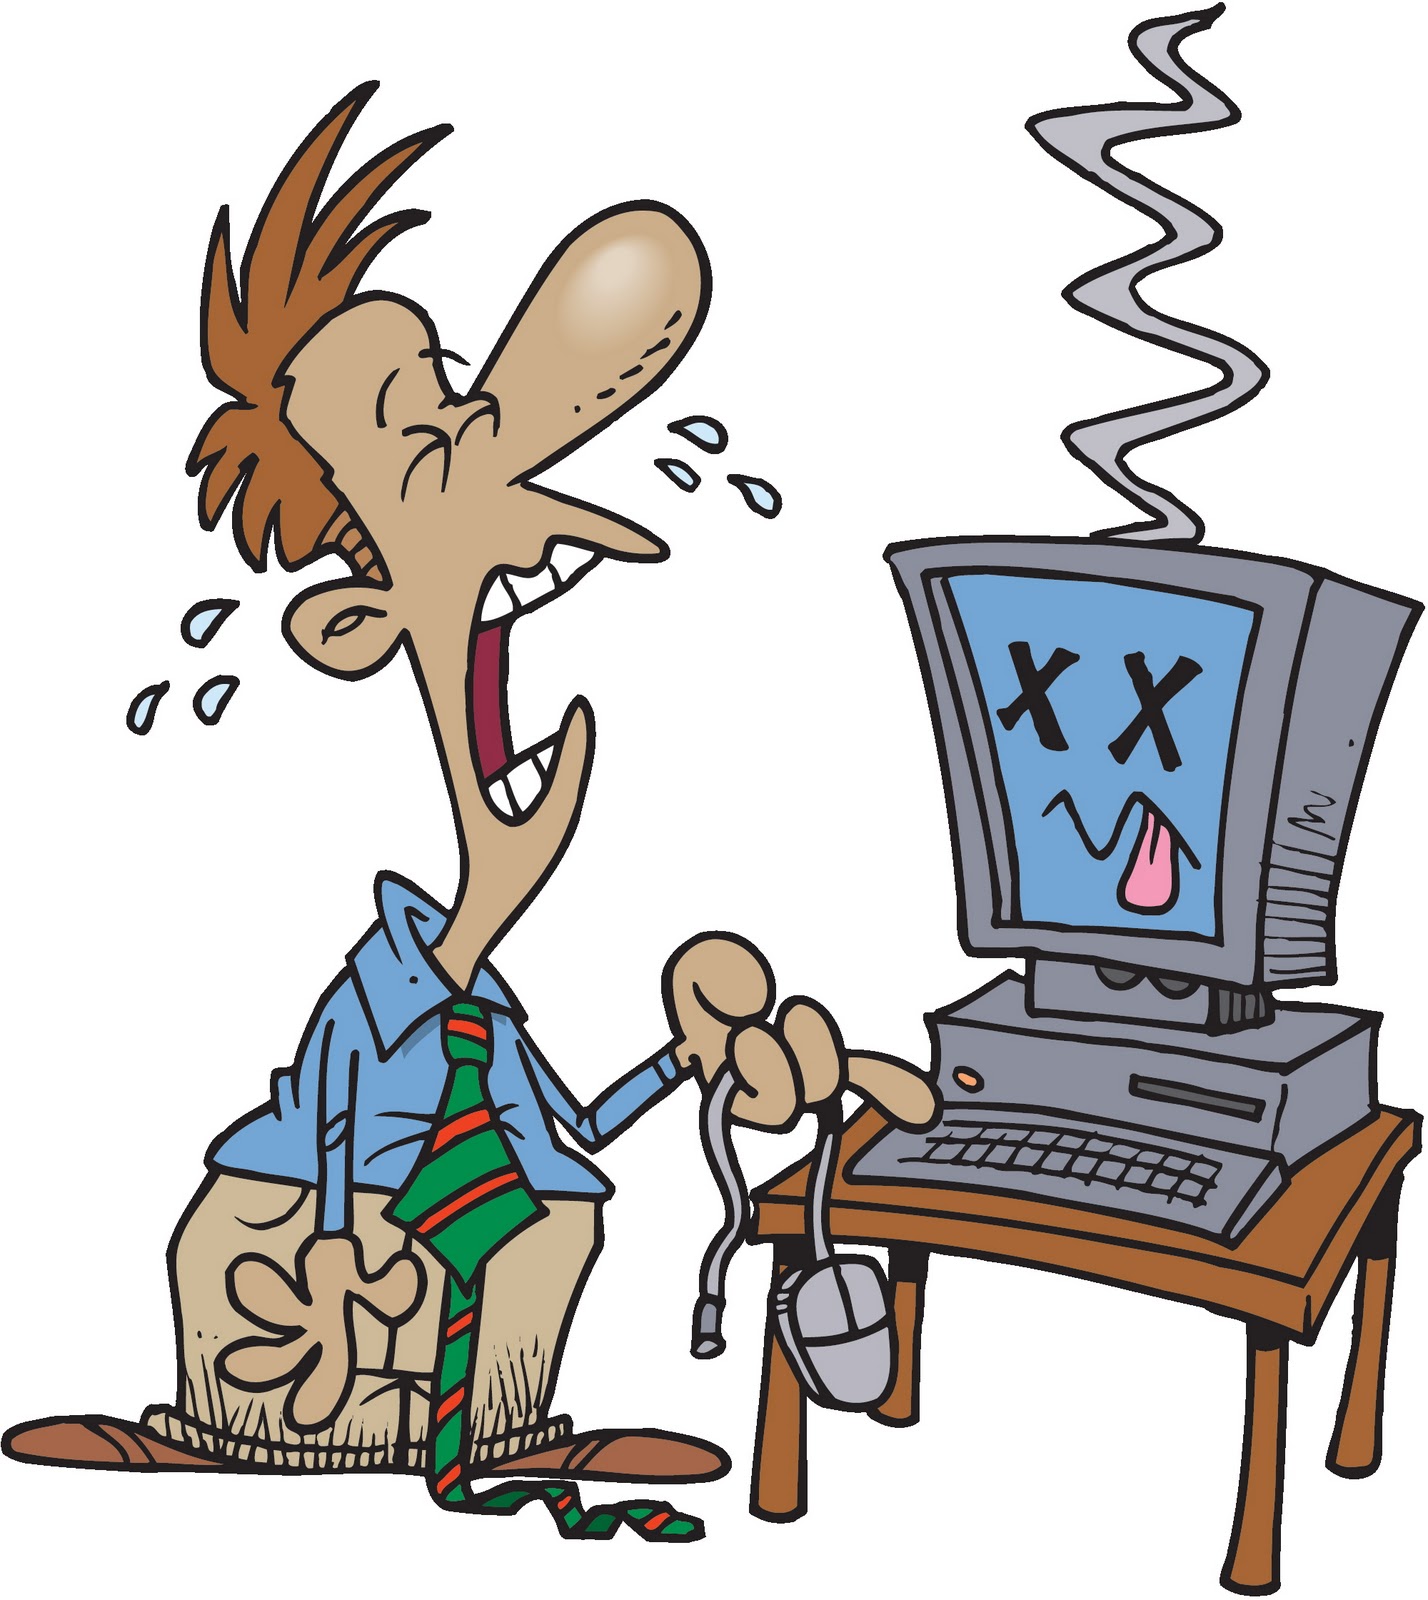 Clip Arts Related To : man using computer clipart. view all Cliparts Data C...